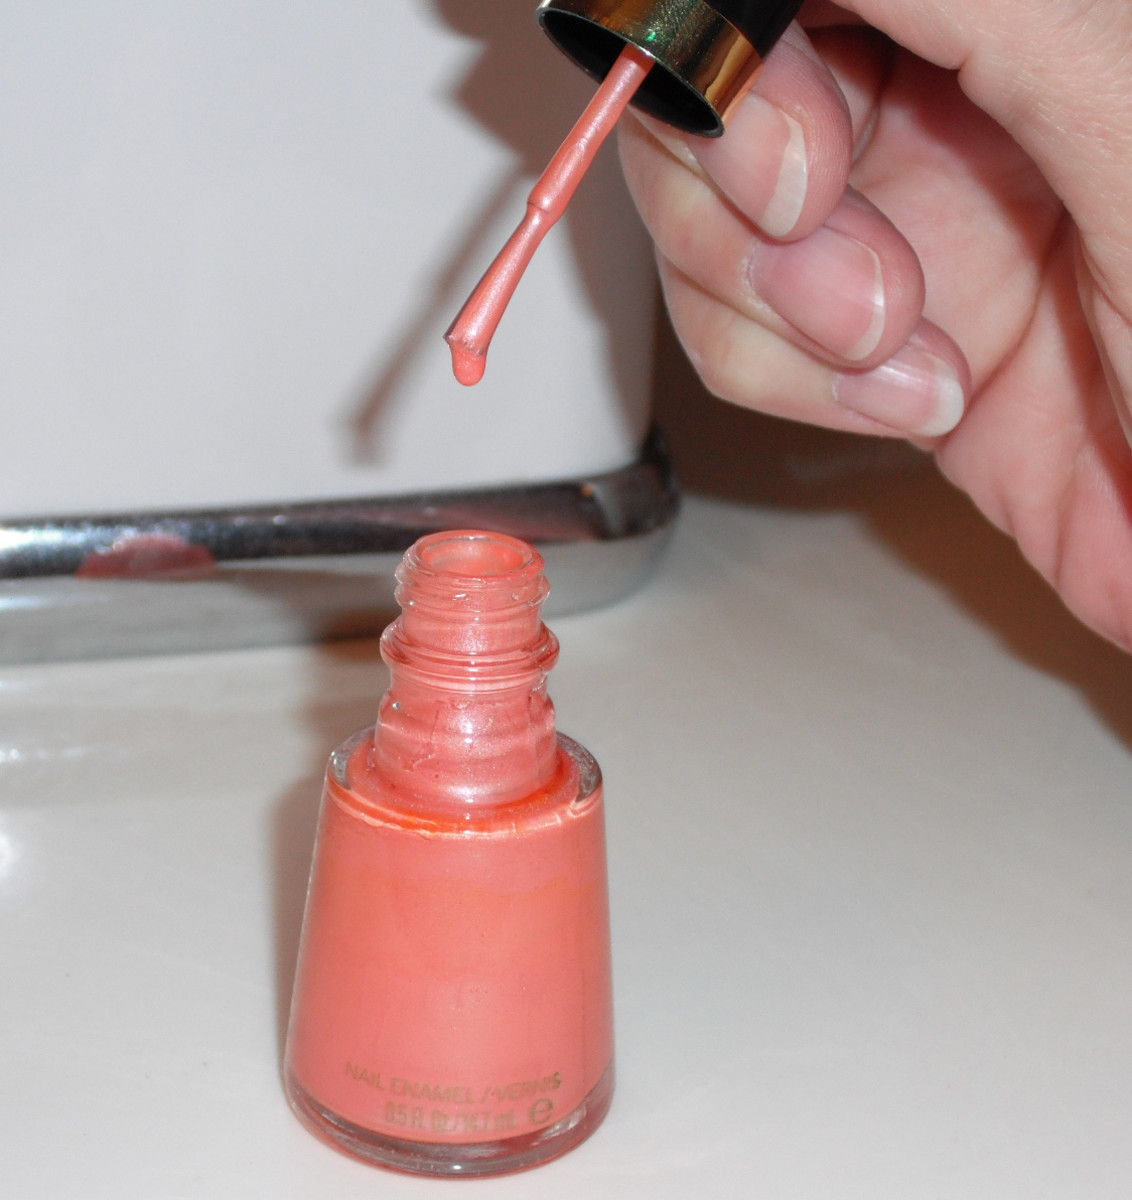 Check the consistency after adding each drop of nail polish thinner.